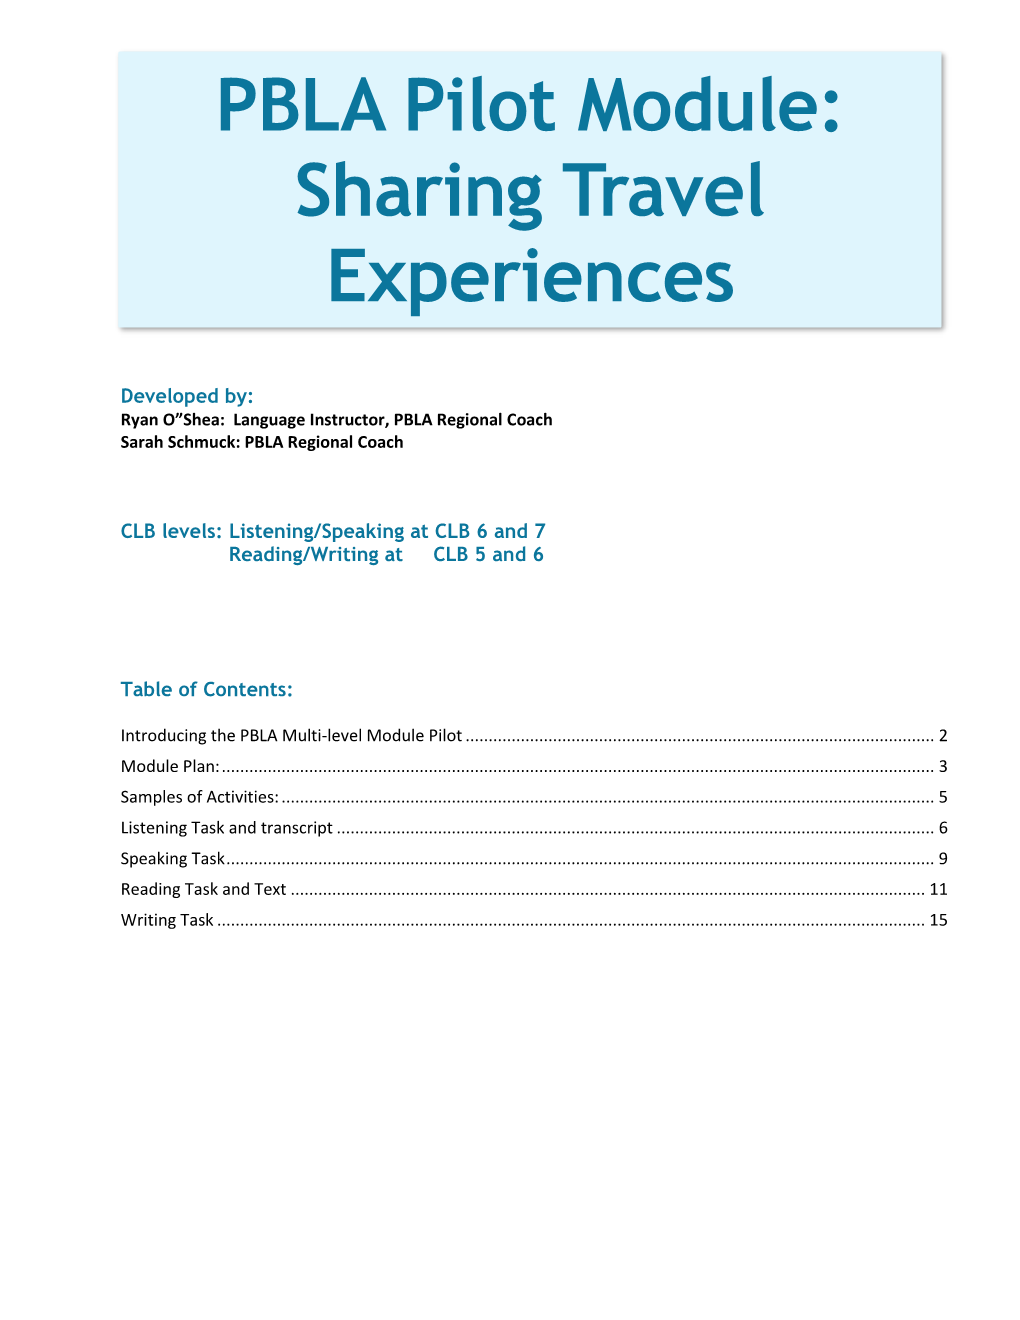 Sharing Travel Experiences